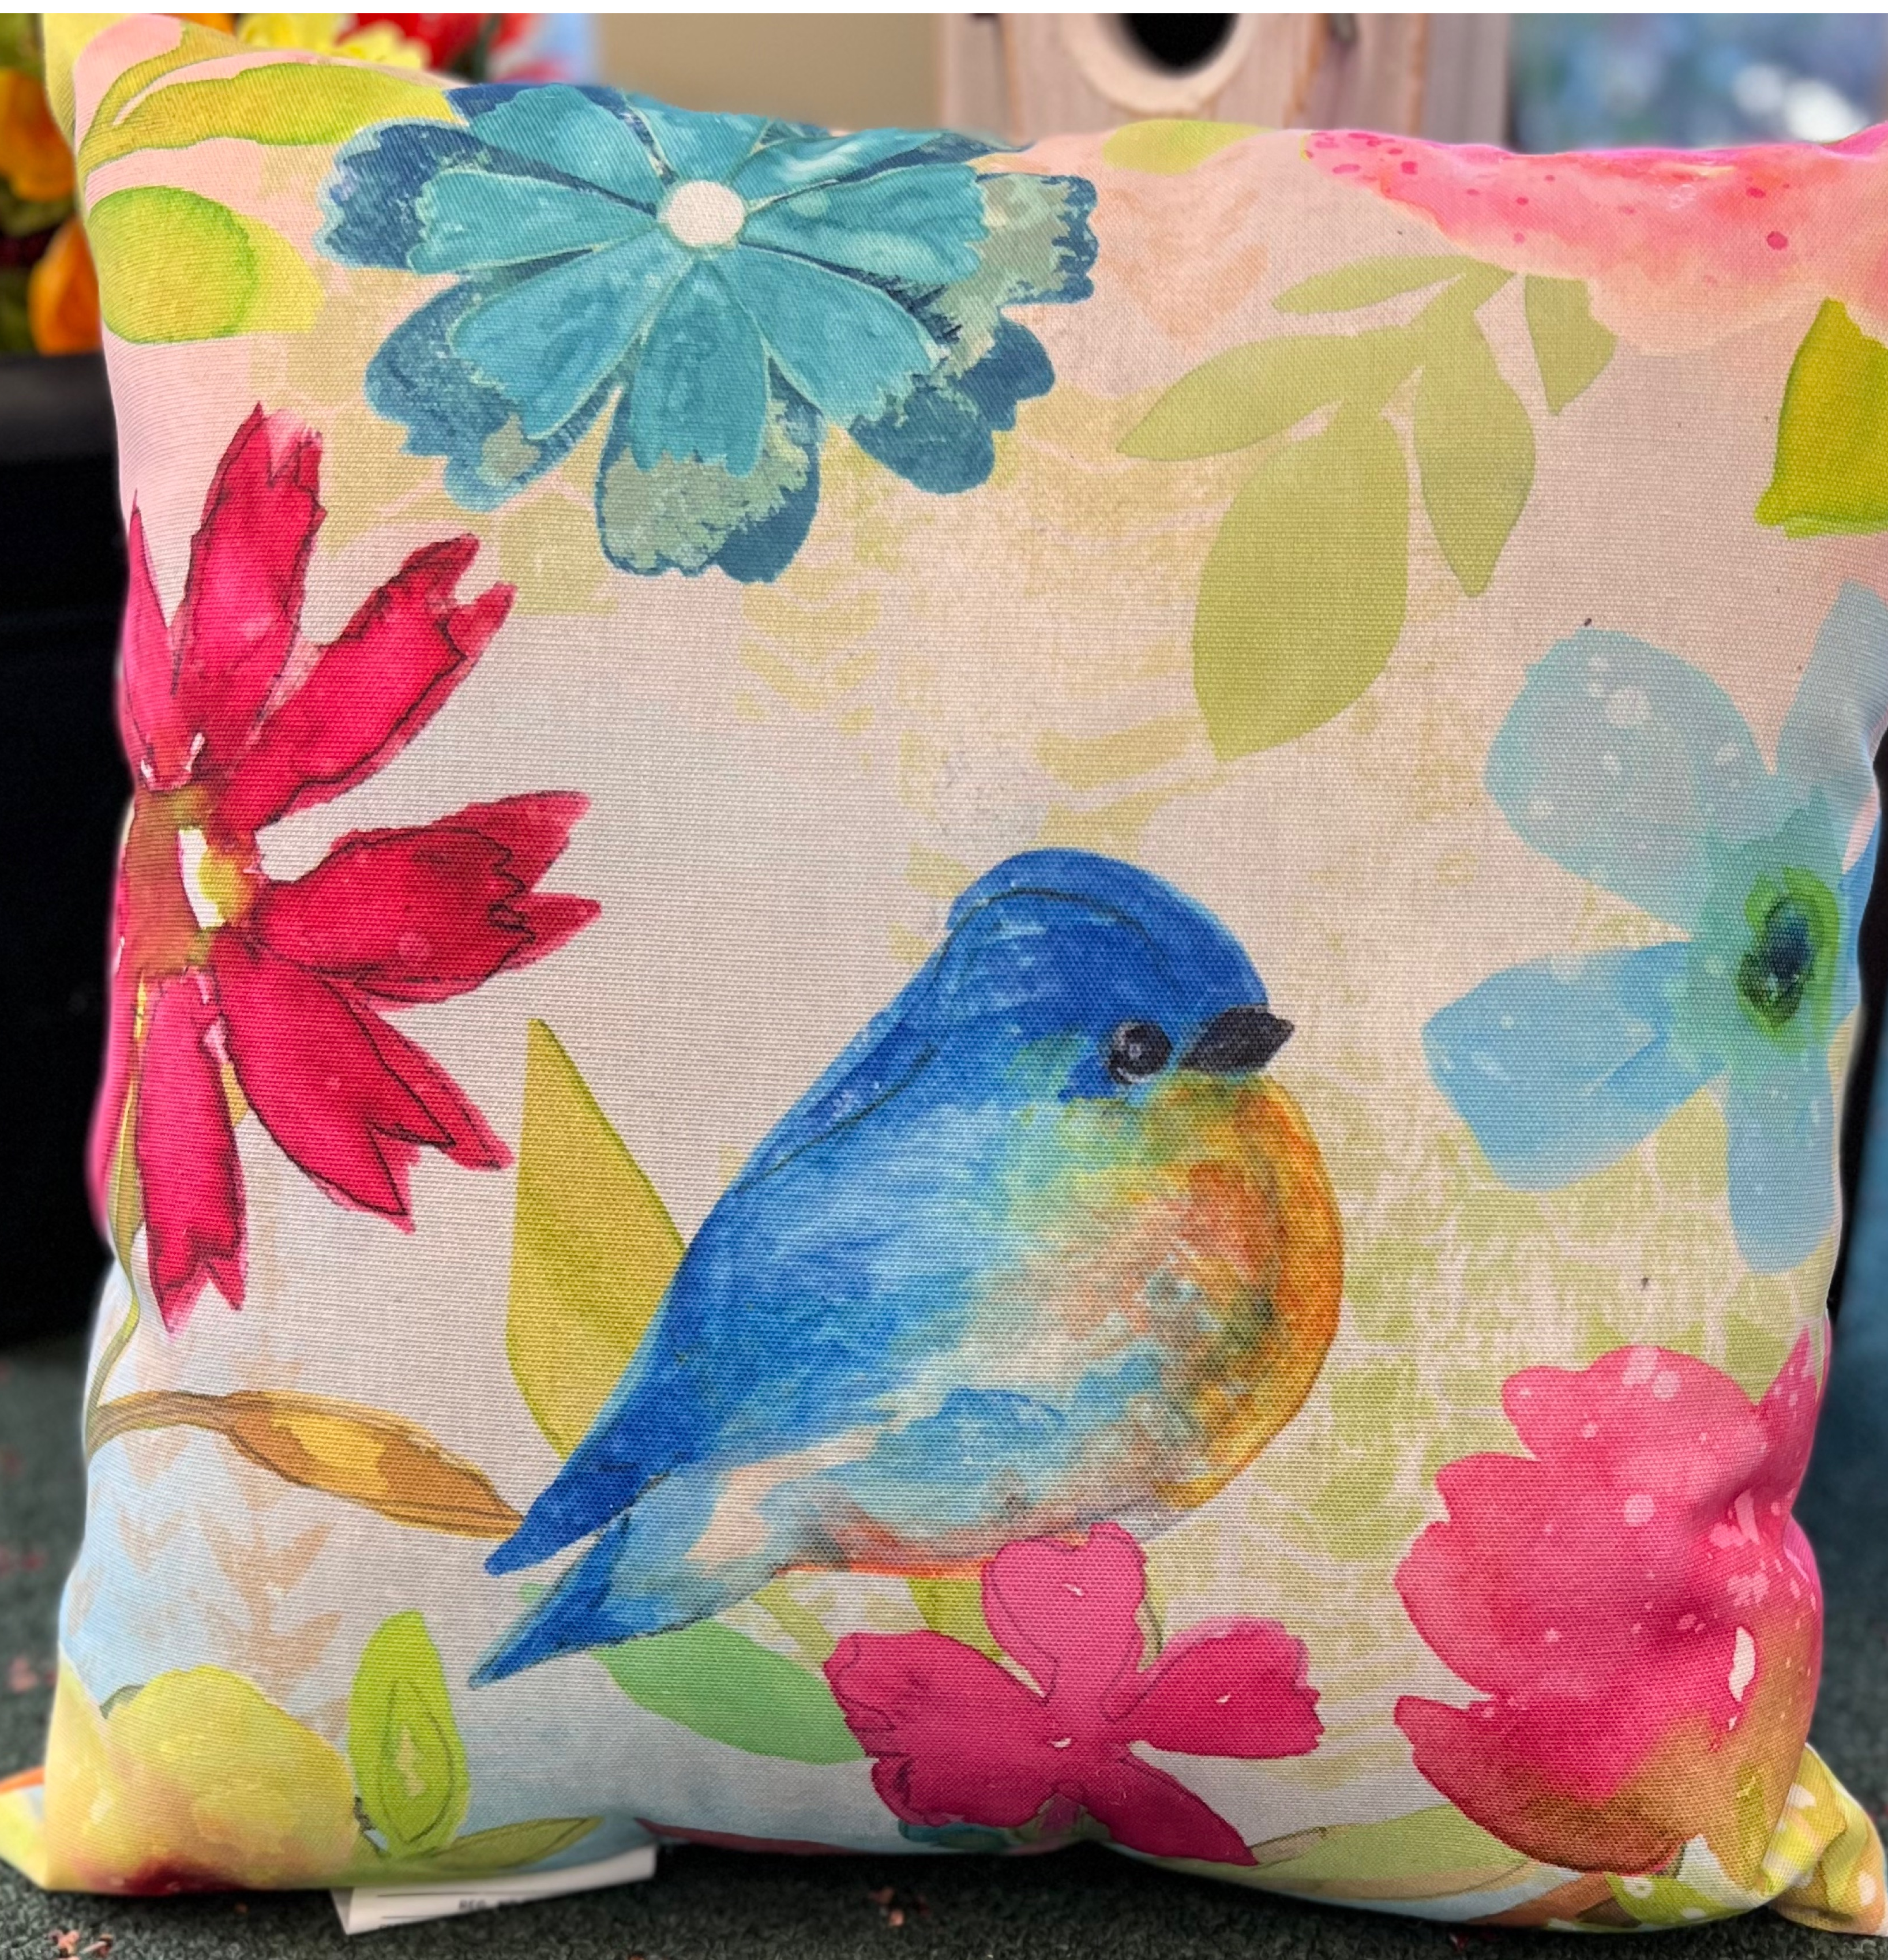 Home Decor and Gifts available at Bird Watcher Supply Company